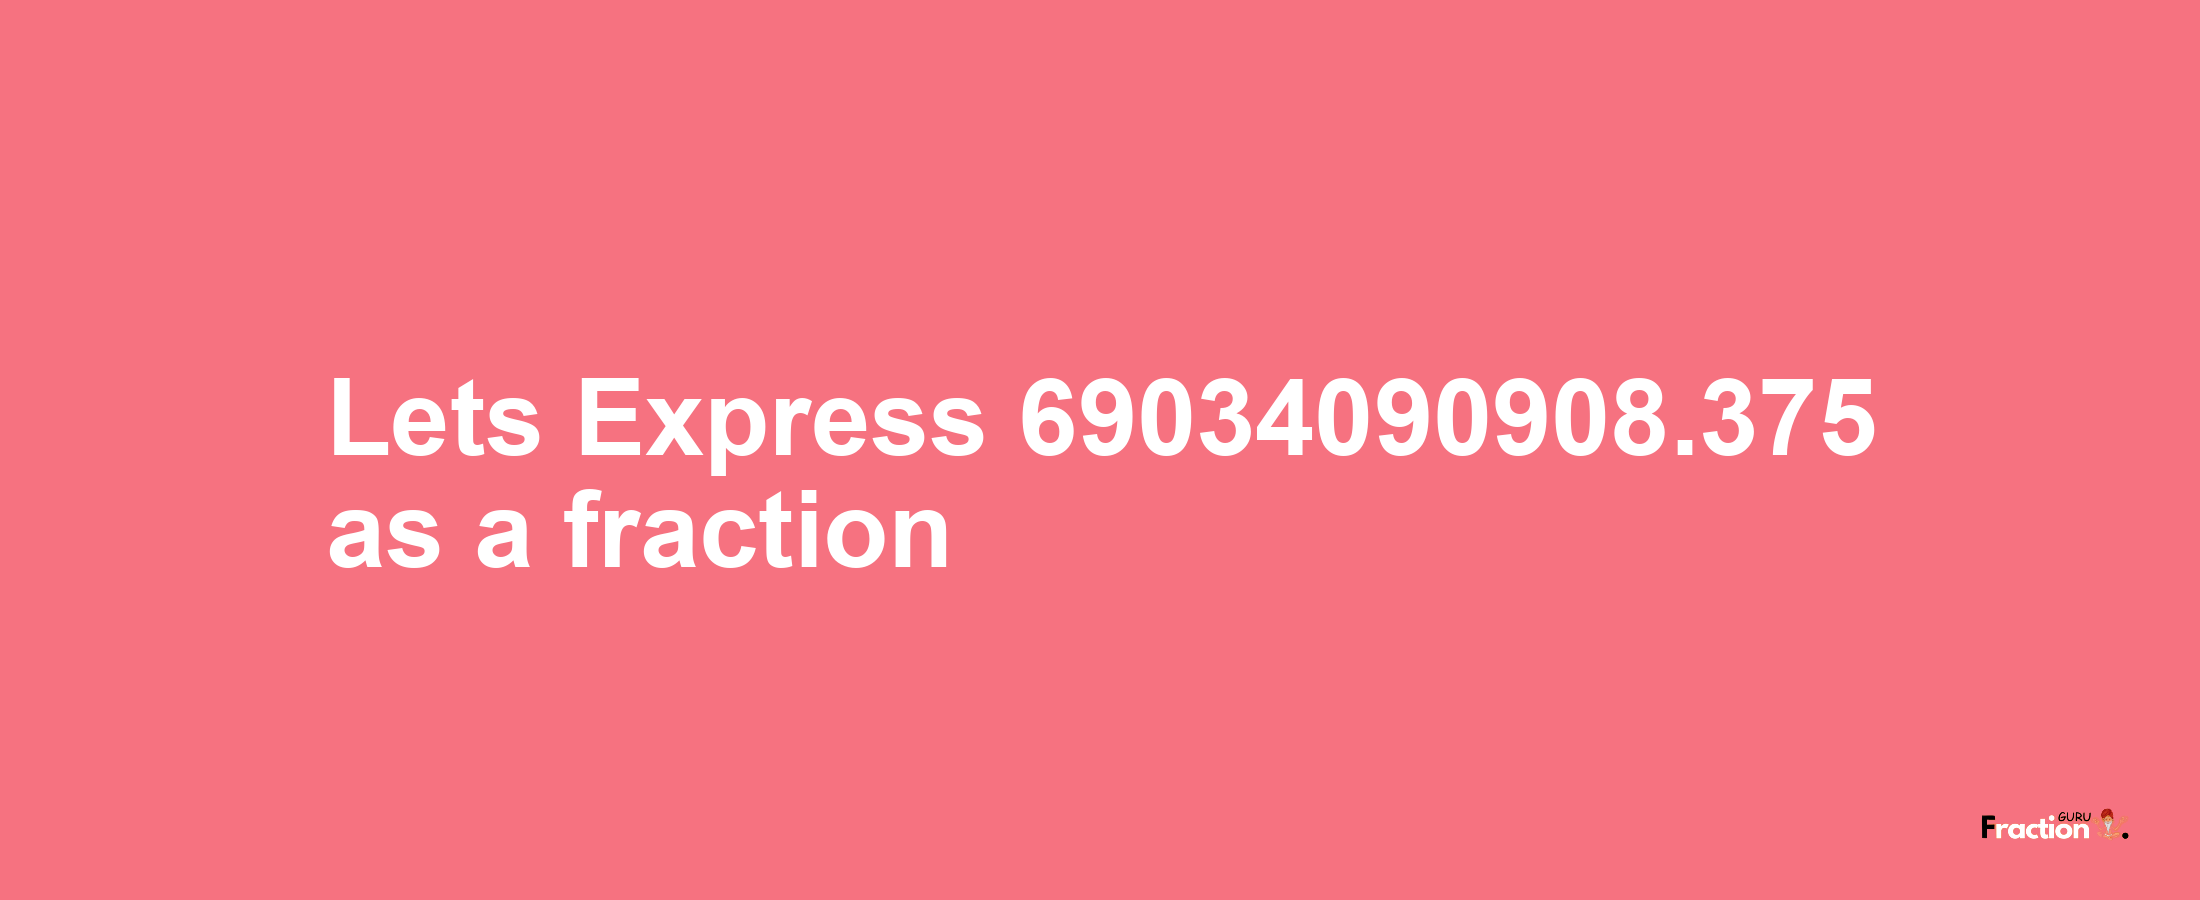 Lets Express 69034090908.375 as afraction